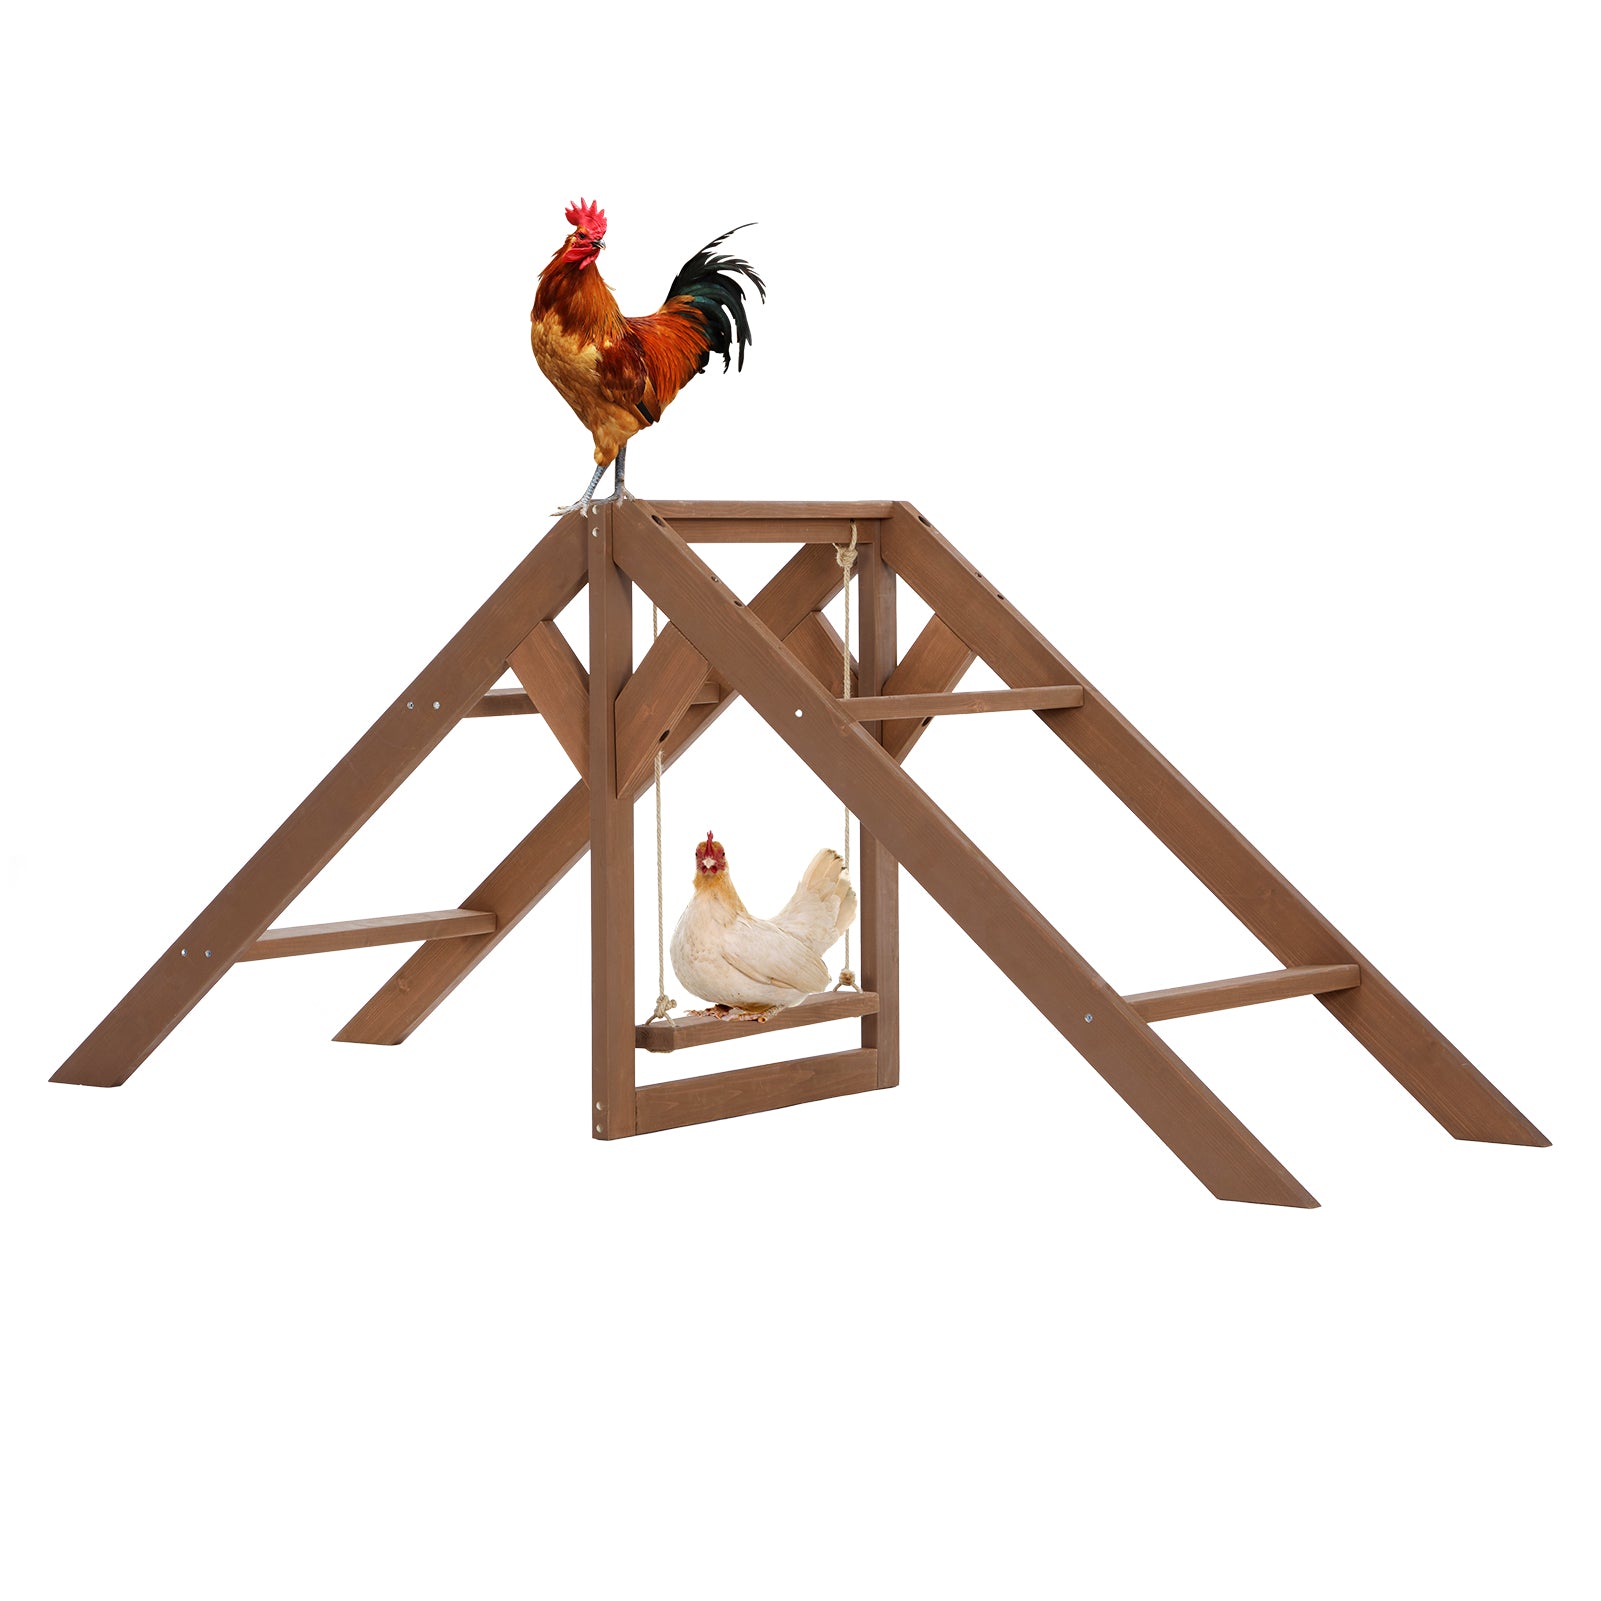 petsfit-chicken-toys-for-coop-accessories-5-chicken-perches-with-swing-are-perfect-for-8-10-chickens-wooden-chicken-ladder-for-pets-healthy-happy-01